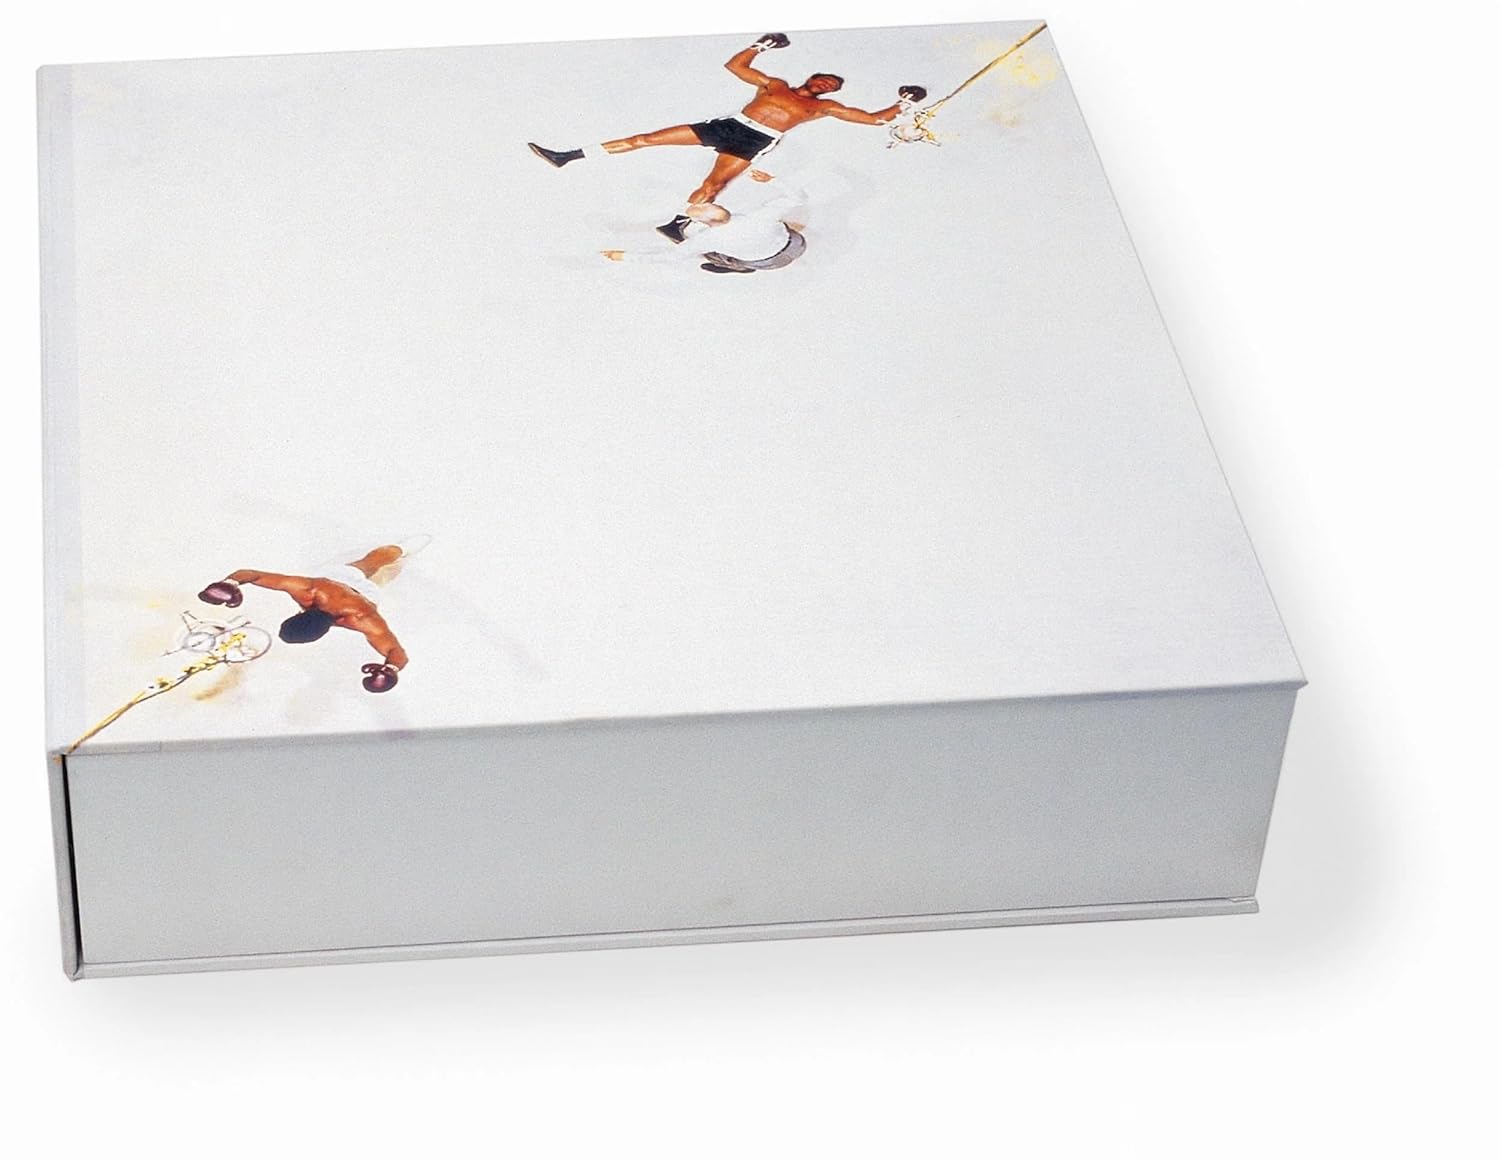 Muhammad Ali and Jeff Koons signed collector's edition of GOAT a tribute to Muhammad Ali. The - Image 6 of 6